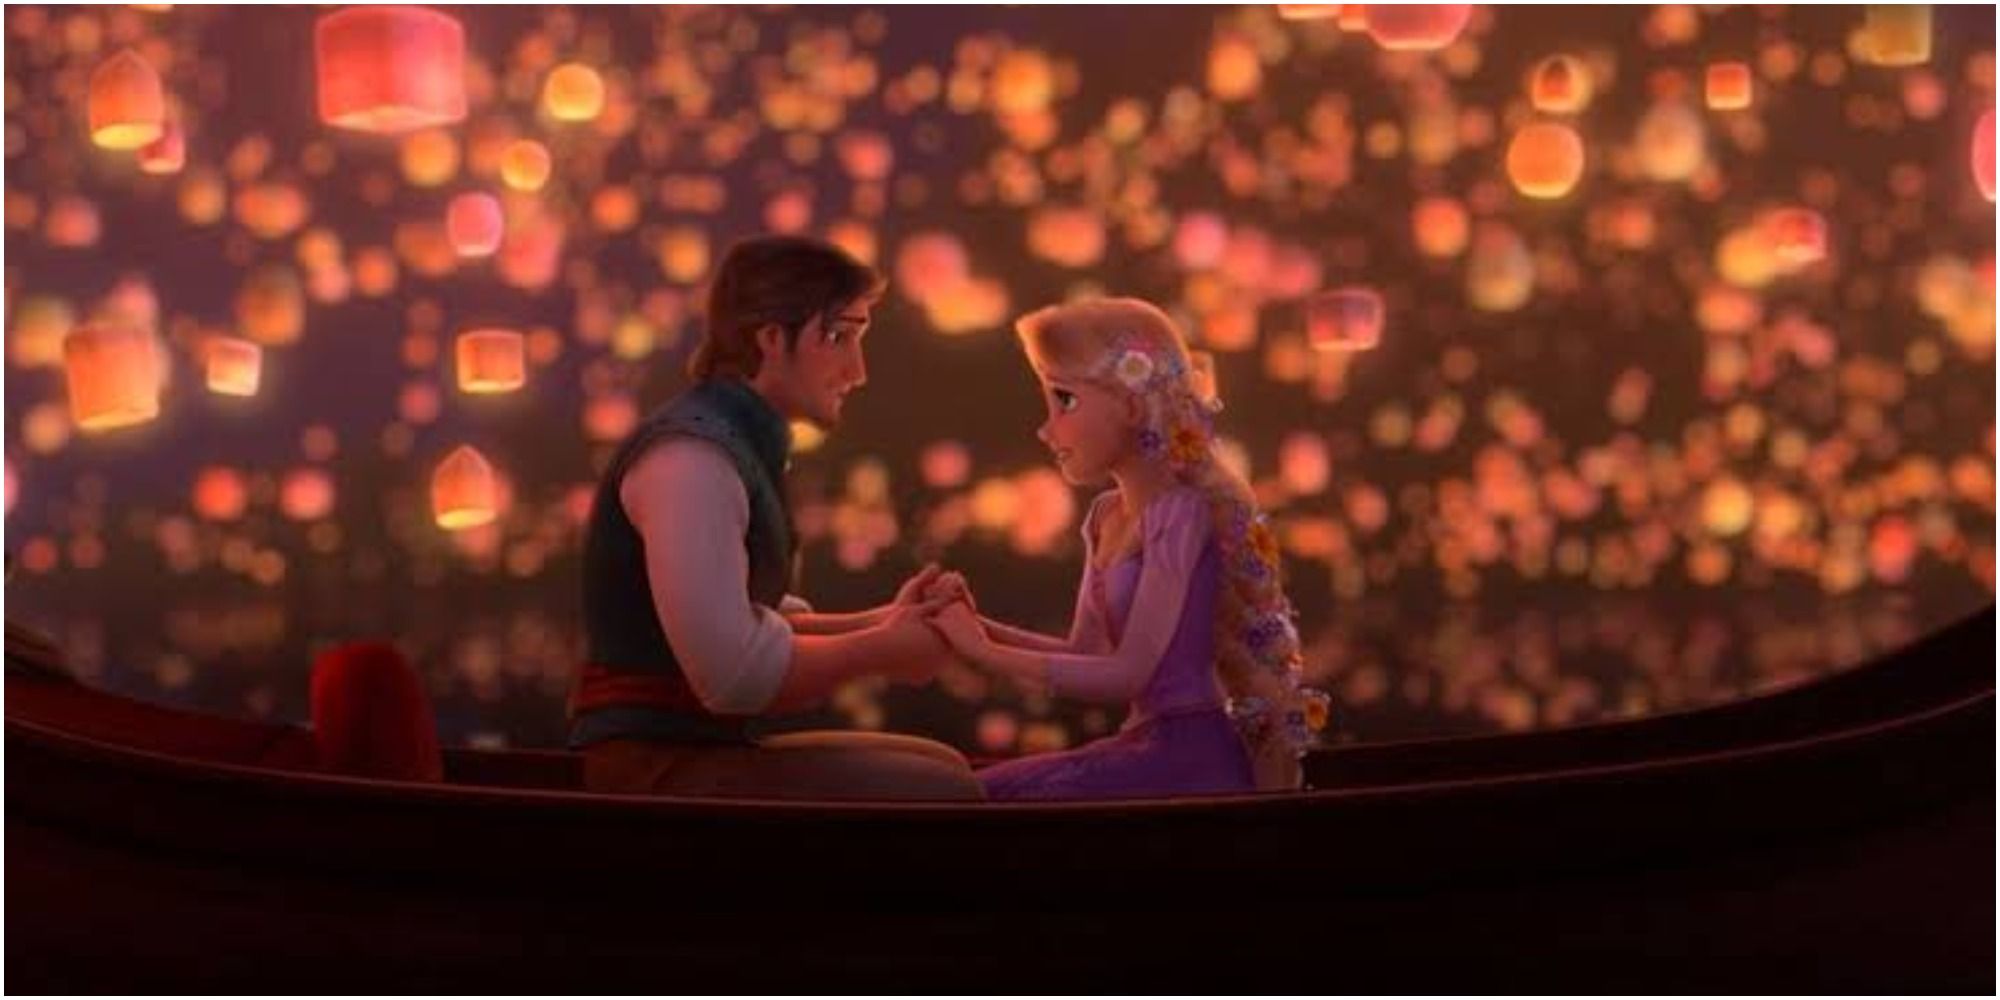 Flynn and Rapunzel in the boat surrounded by lanterns in Tangled